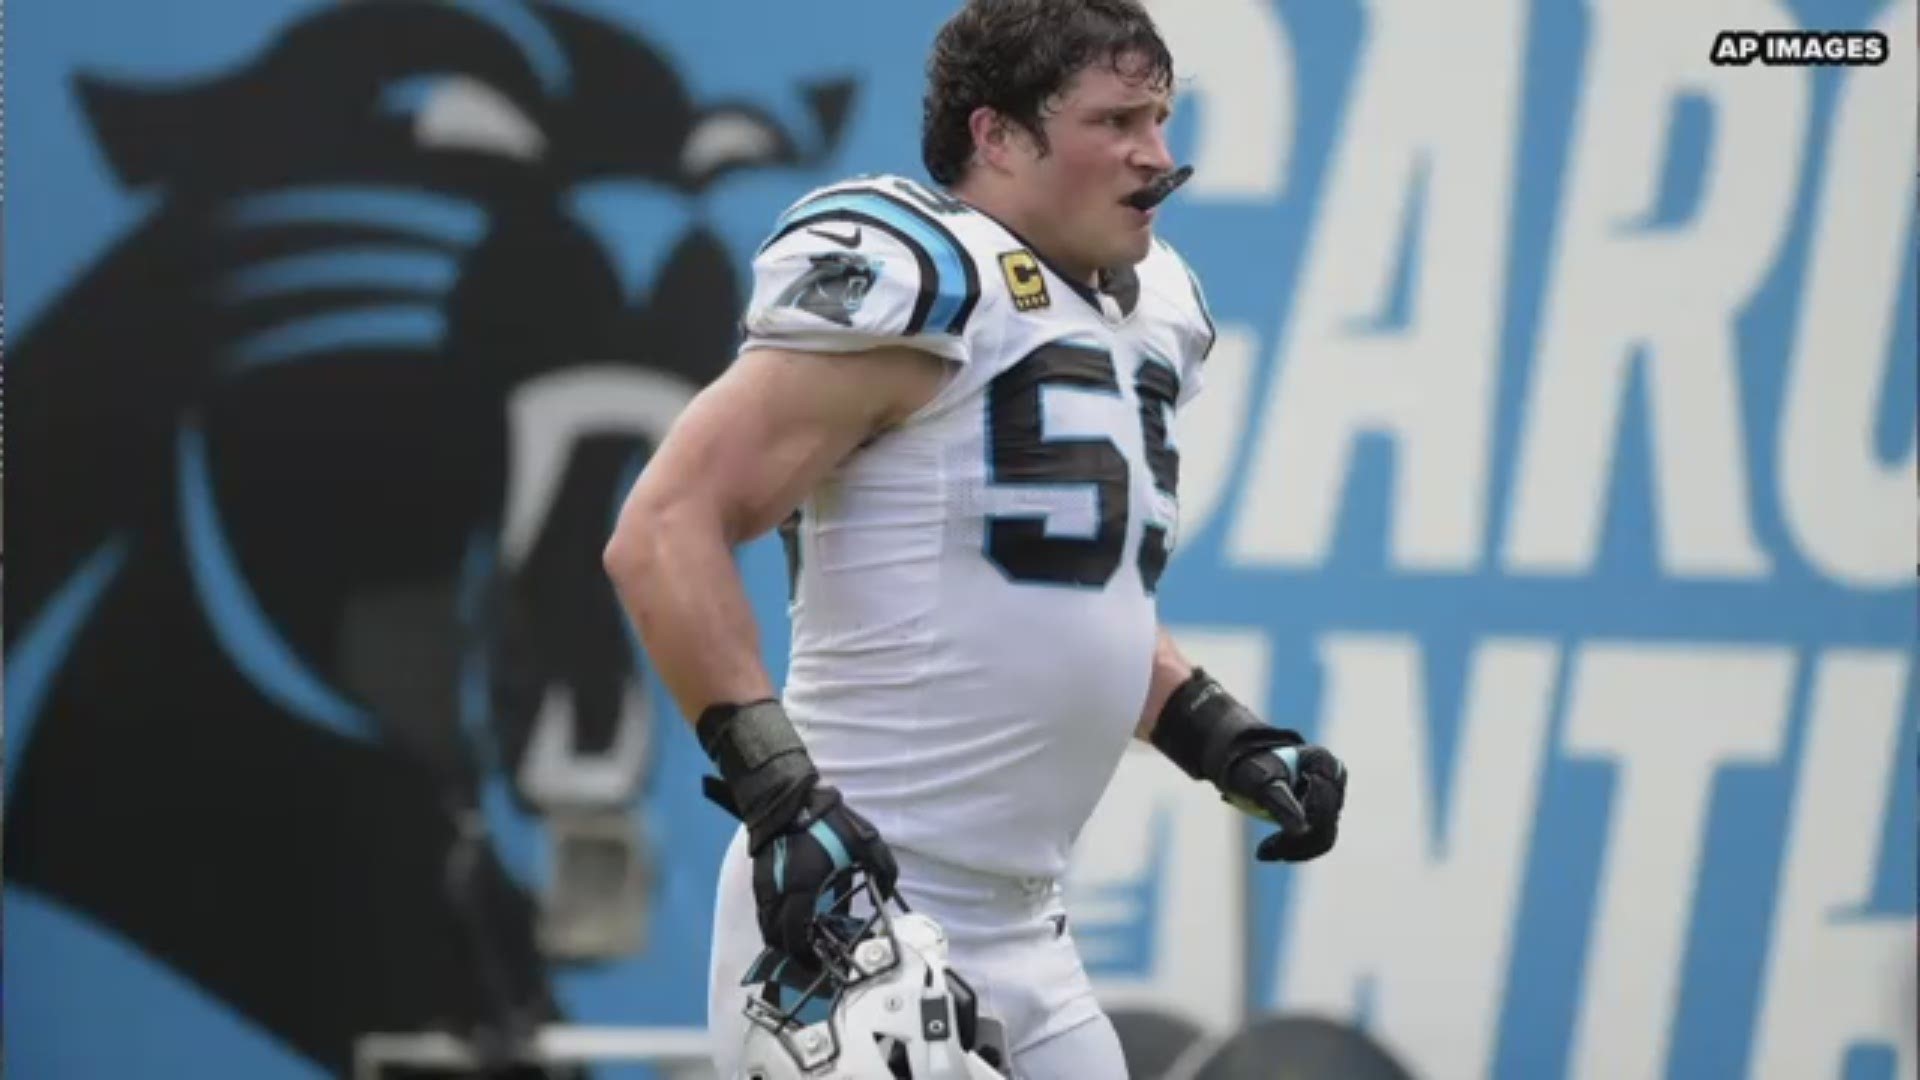 In my heart I know it's the right thing to do,' Luke Kuechly